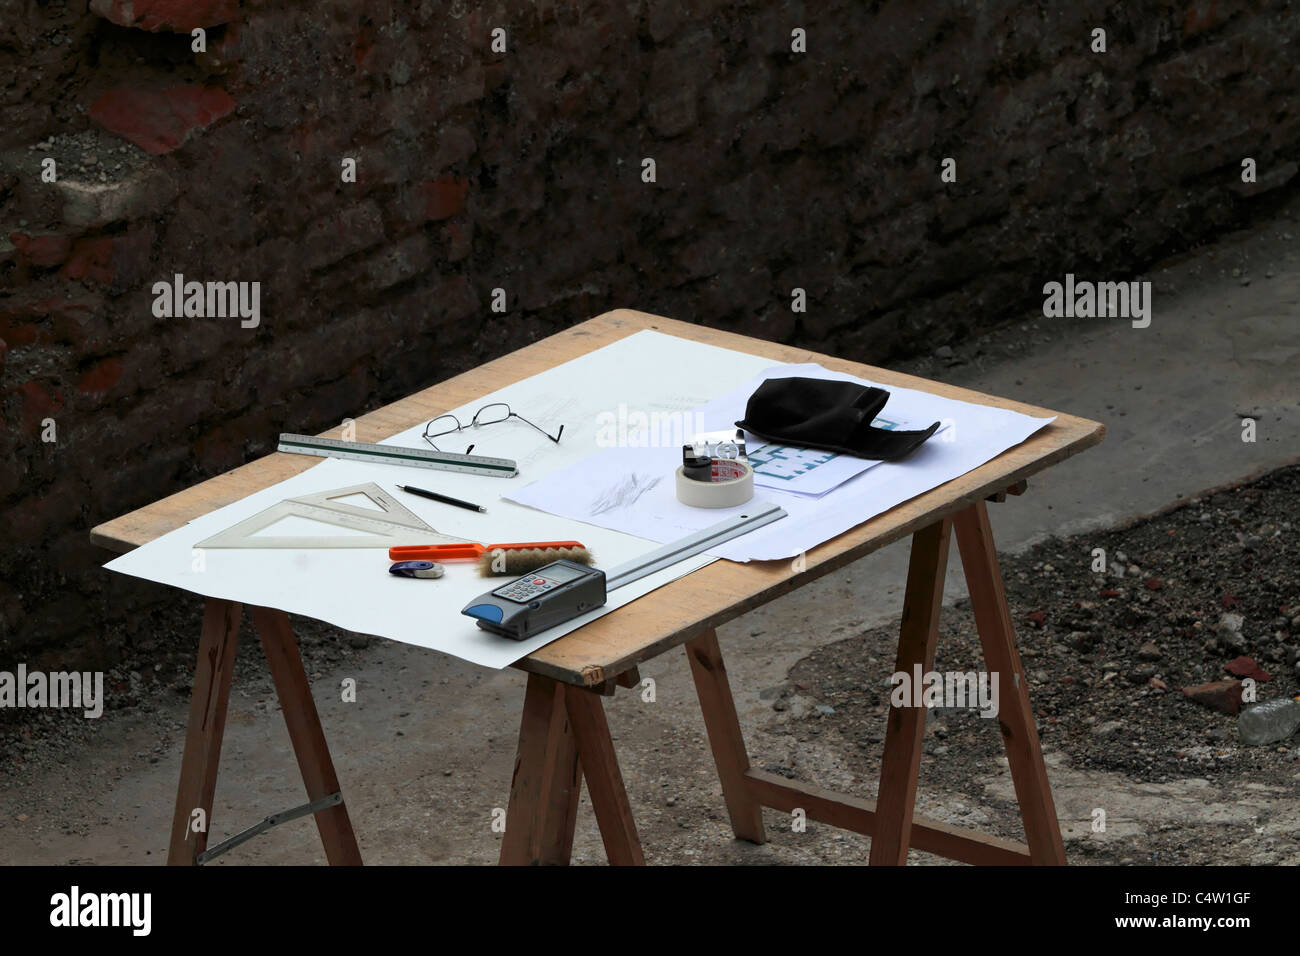 Archaeologists plans on a wooden table, Munich Upper Bavaria Germany Stock Photo